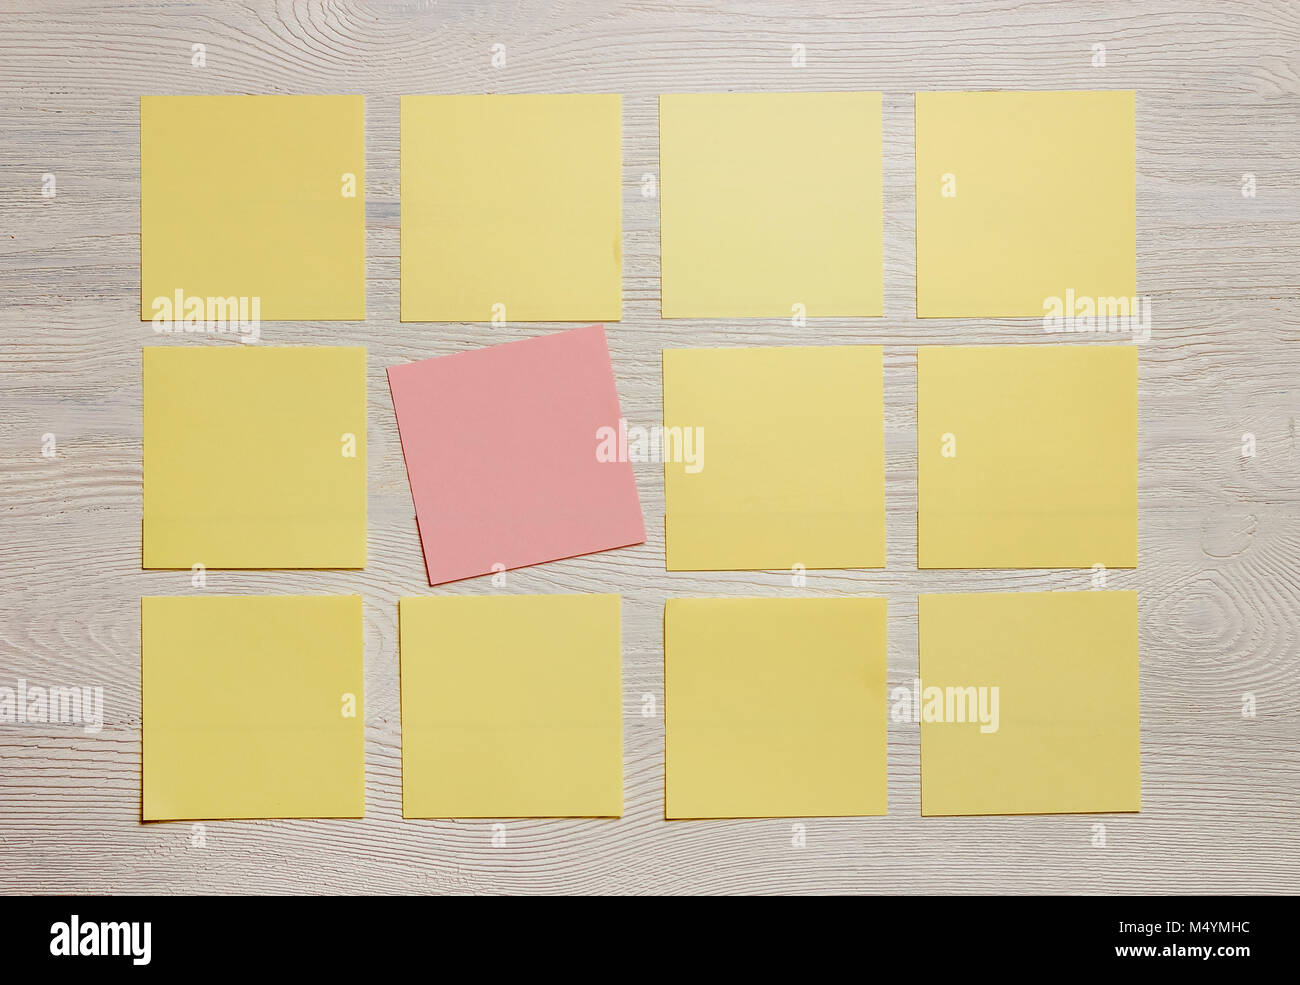 Stationary, Blank Colored Sticker Notes on White Wooden Board. Top View. Flat Lay. Time-management, Planning. Stock Photo